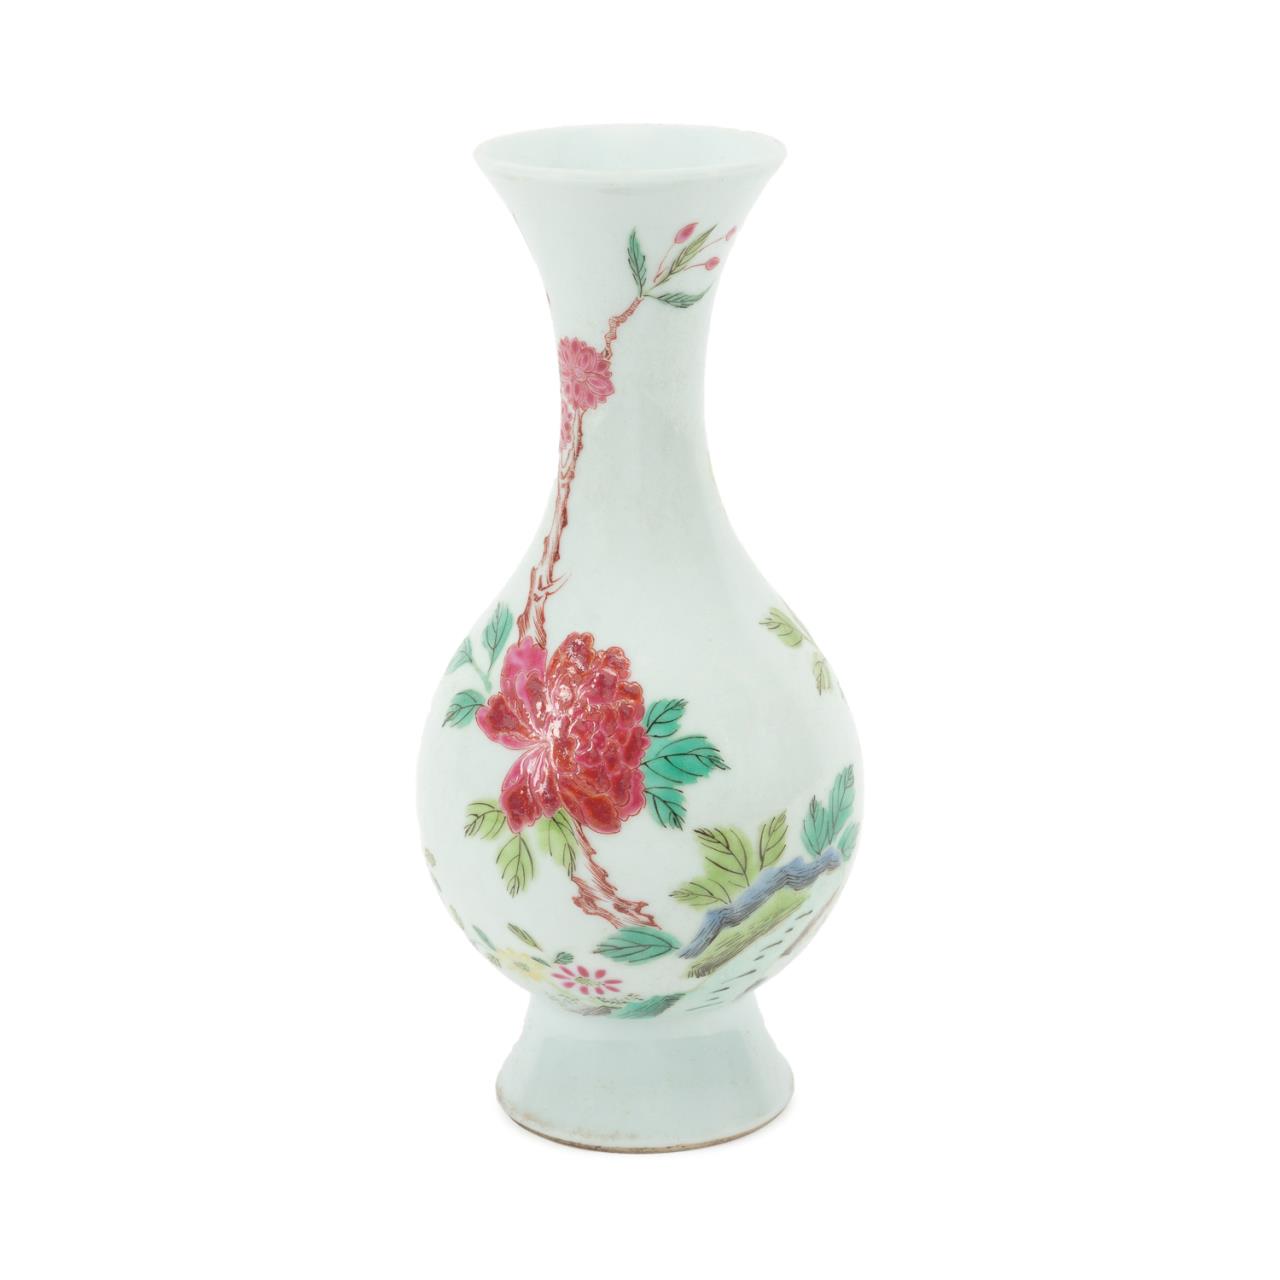 CHINESE FAMILLE ROSE PORCELAIN 2bfb52